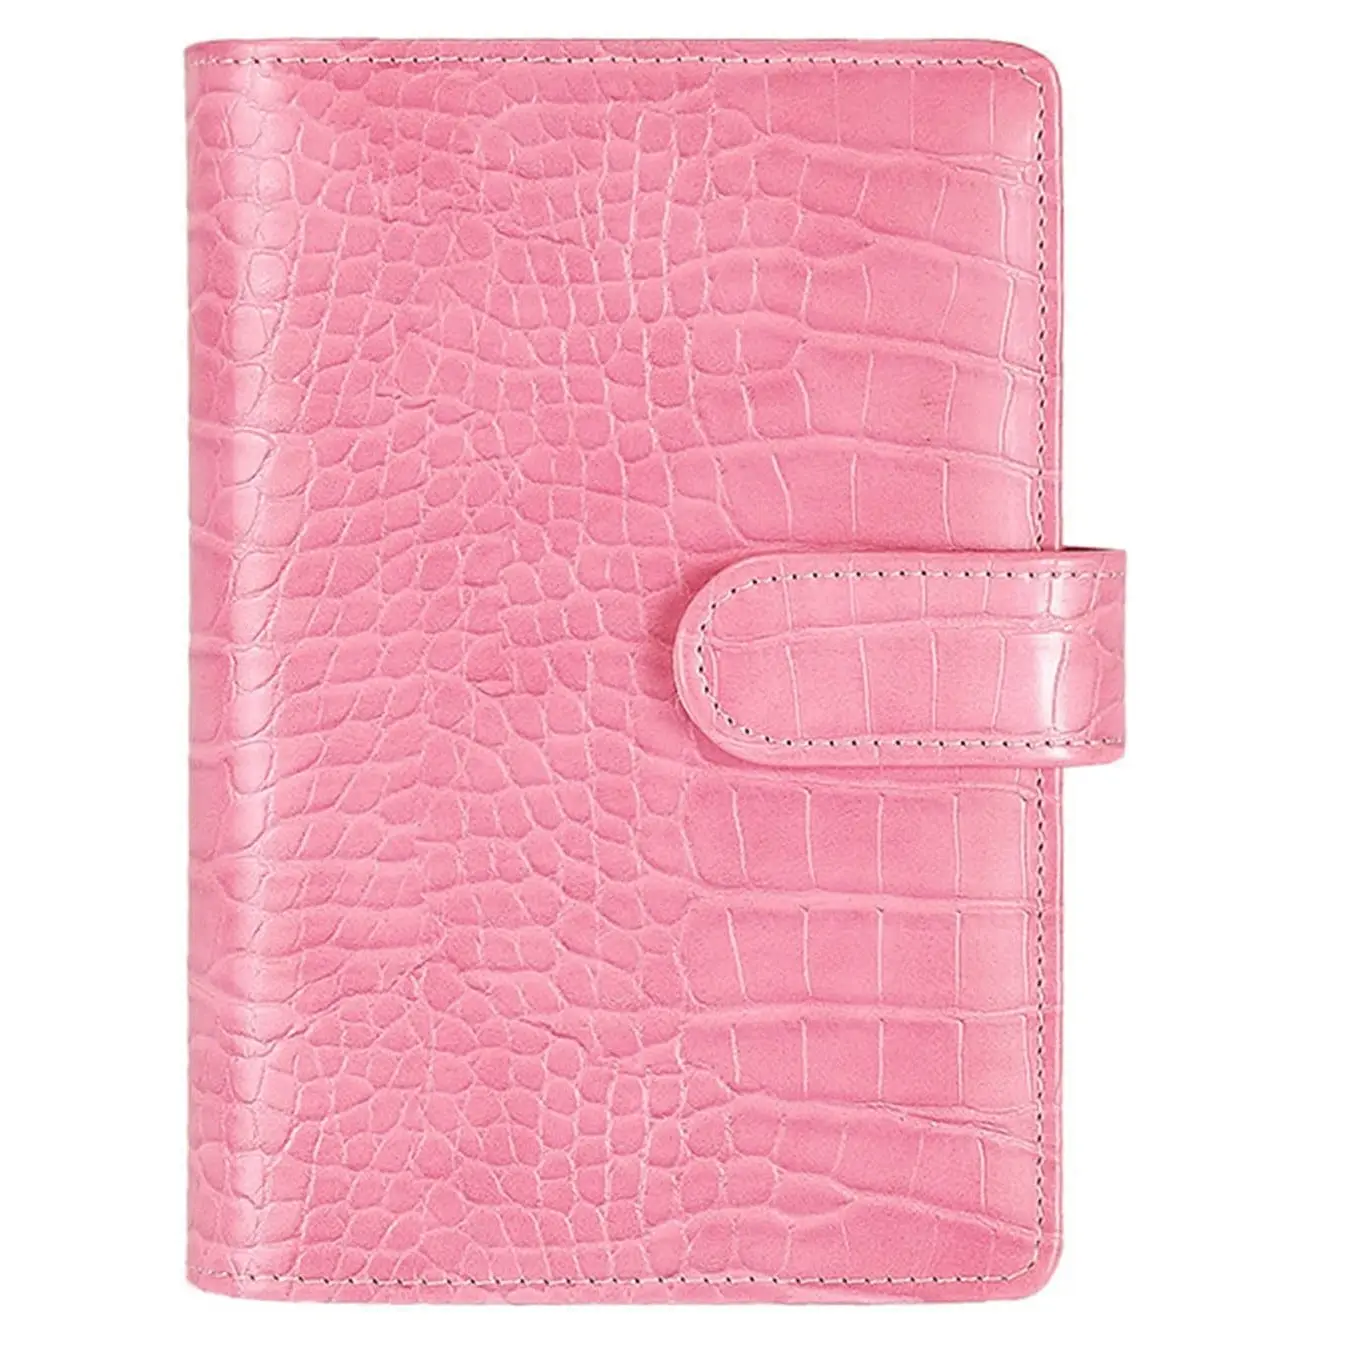 High Quality Personalized Pu Leather Binder Planner Journal Agenda Notebook with Pen Holder